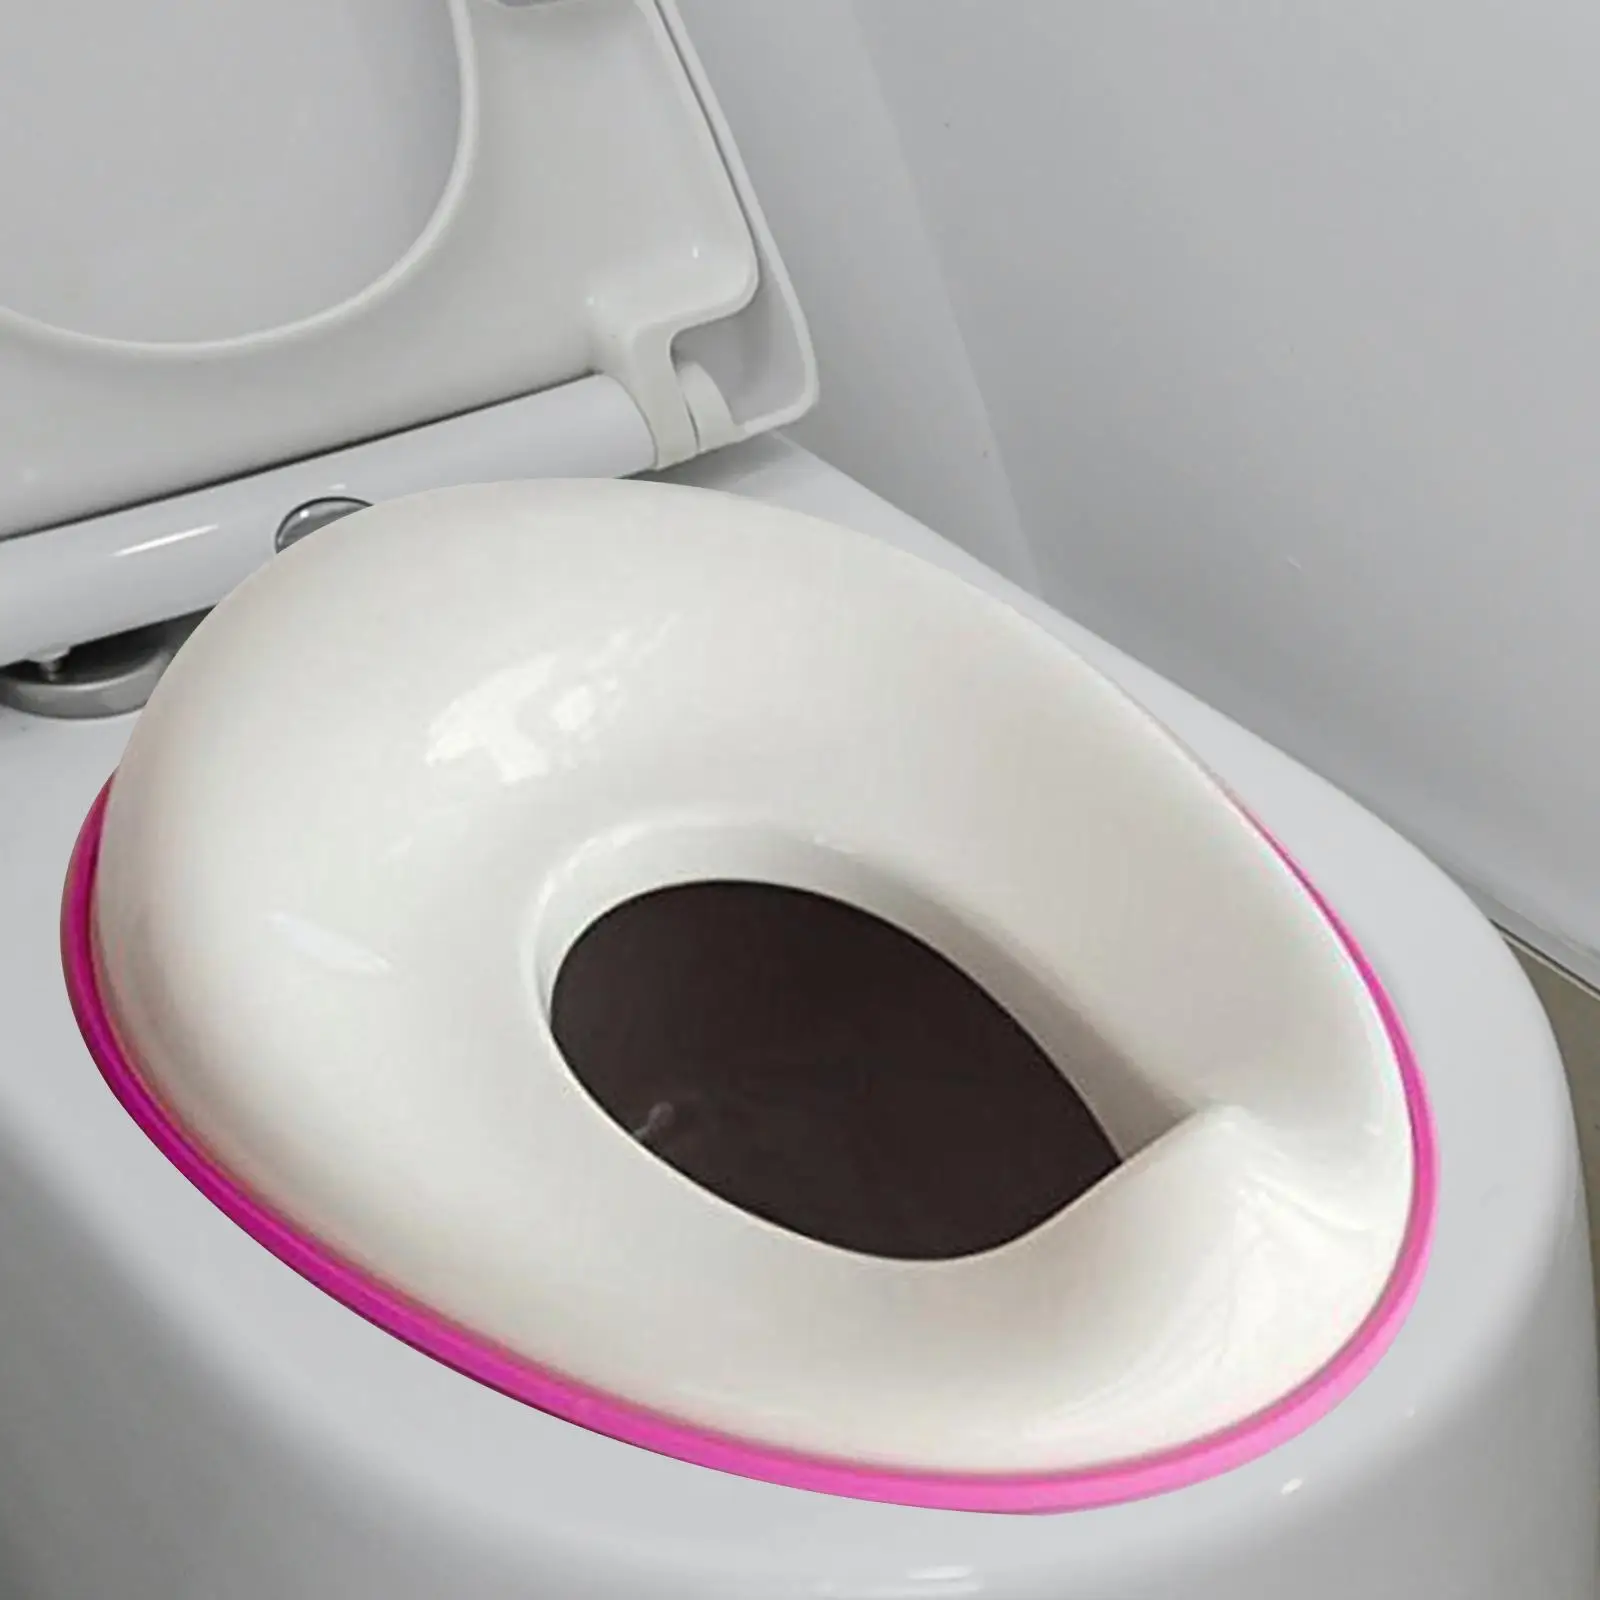 Toilet training Seat Fits Round & Oval Toilets with splash Space Saving